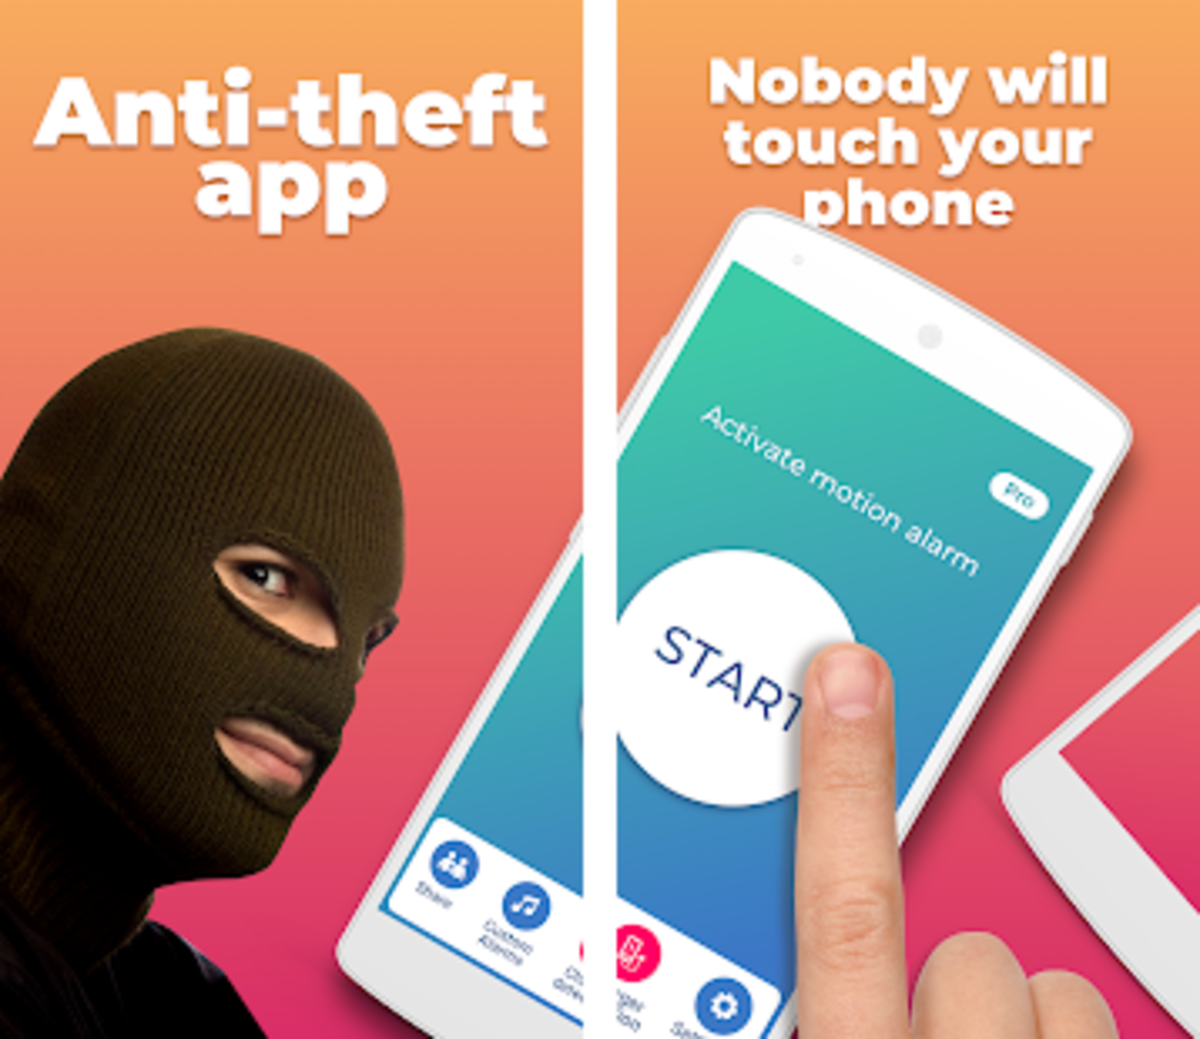 tips-and-tricks-to-protect-your-smartphone-from-thieves